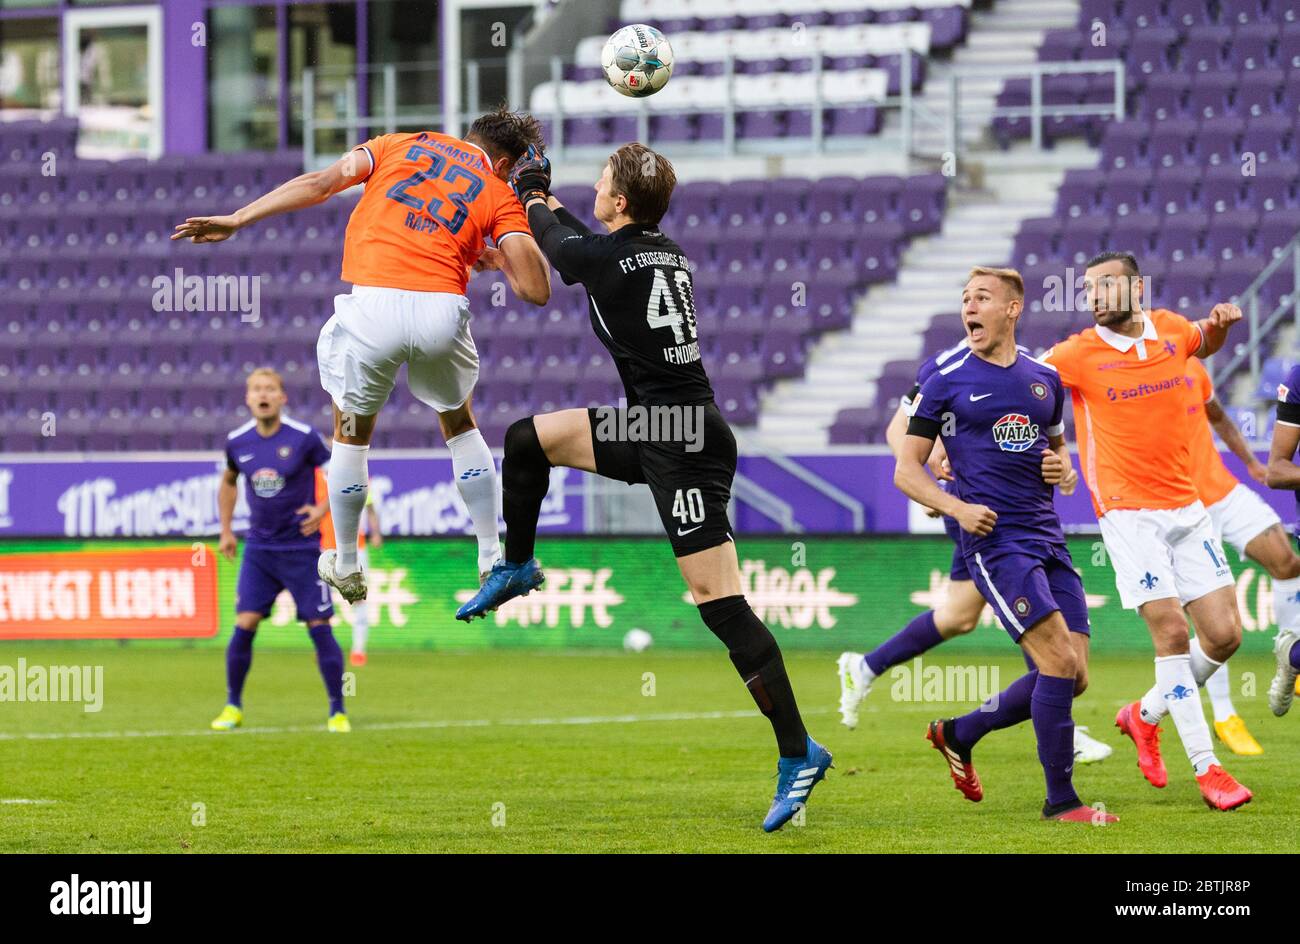 Aue, Germany. 26th May, 2020. Football: 2nd Bundesliga, FC Erzgebirge Aue - SV Darmstadt 98, 28th matchday, at the Sparkassen-Erzgebirgsstadion. Nicolai Rapp of Darmstadt against Aue's goalkeeper Robert Jendrusch. Credit: Robert Michael/dpa-Zentralbild - Pool/dpa - IMPORTANT NOTE: In accordance with the regulations of the DFL Deutsche Fußball Liga and the DFB Deutscher Fußball-Bund, it is prohibited to exploit or have exploited in the stadium and/or from the game taken photographs in the form of sequence images and/or video-like photo series./dpa/Alamy Live News Stock Photo